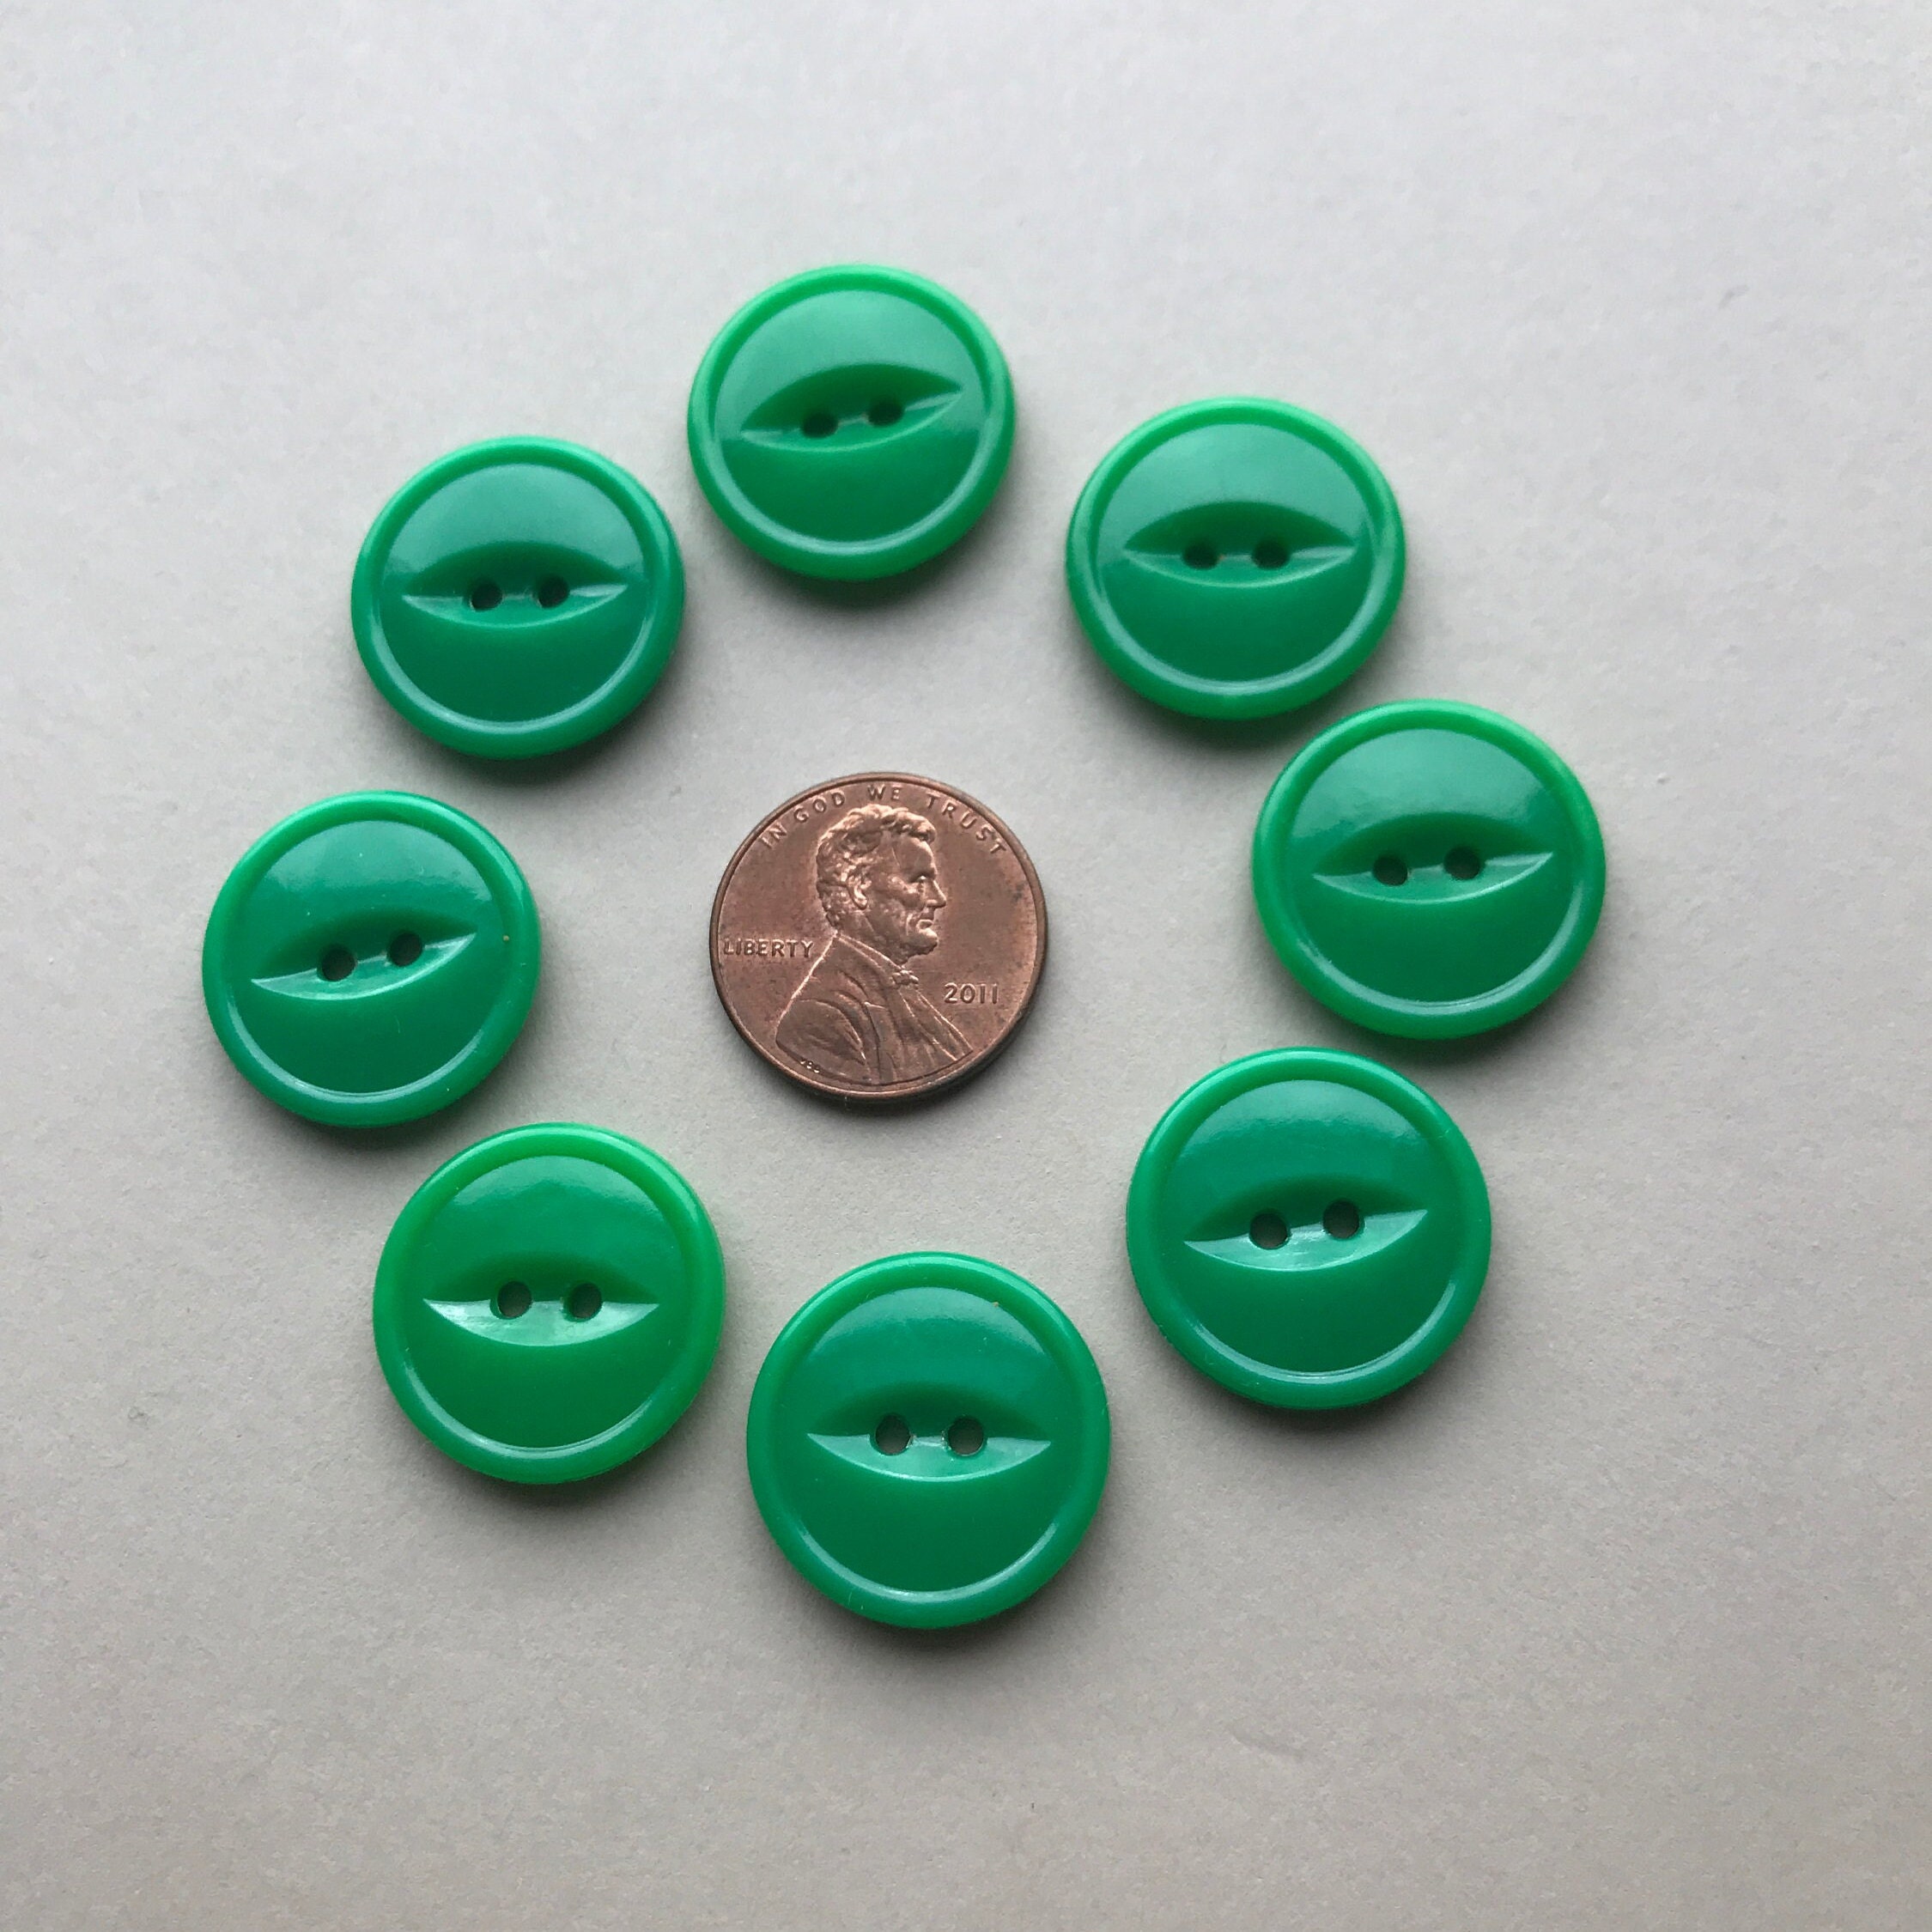 Qovydx 1600Pcs Green Buttons for Crafts Assorted Sizes Buttons Green in  Bulk Green Craft Buttons Assortment Christmas Buttons